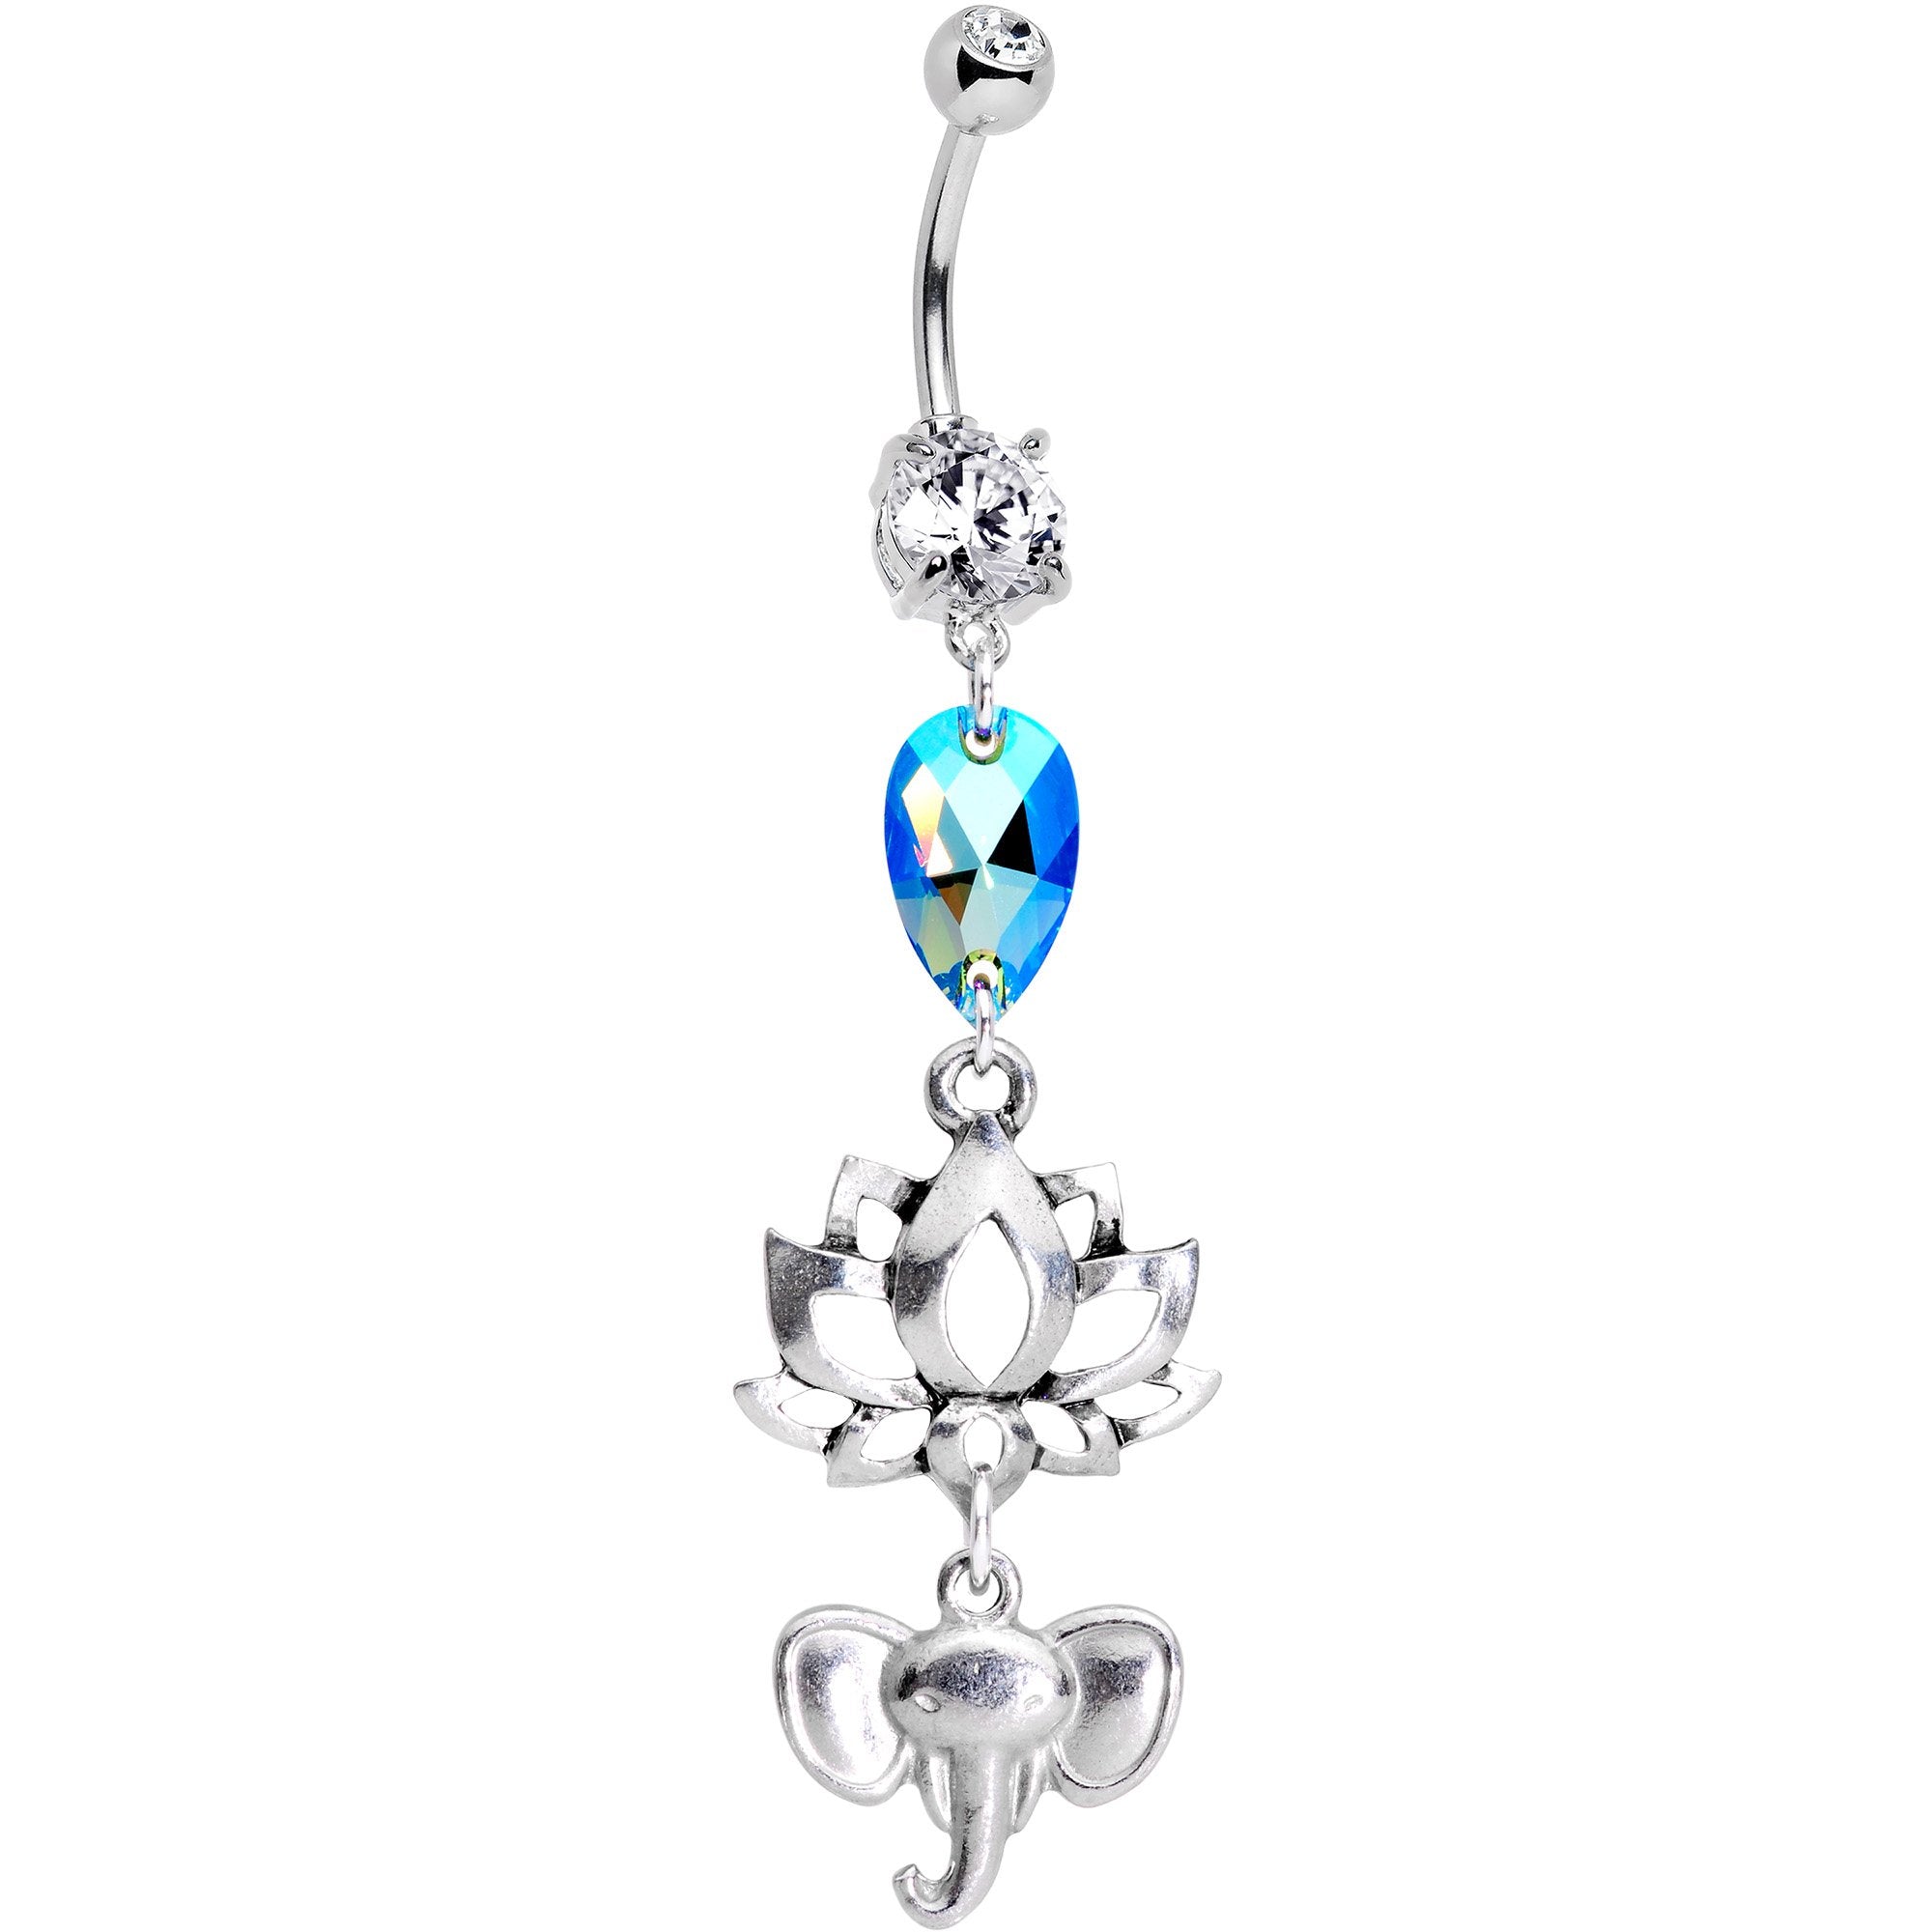 Handmade Zen Spirit Dangle Belly Ring Created with Crystals